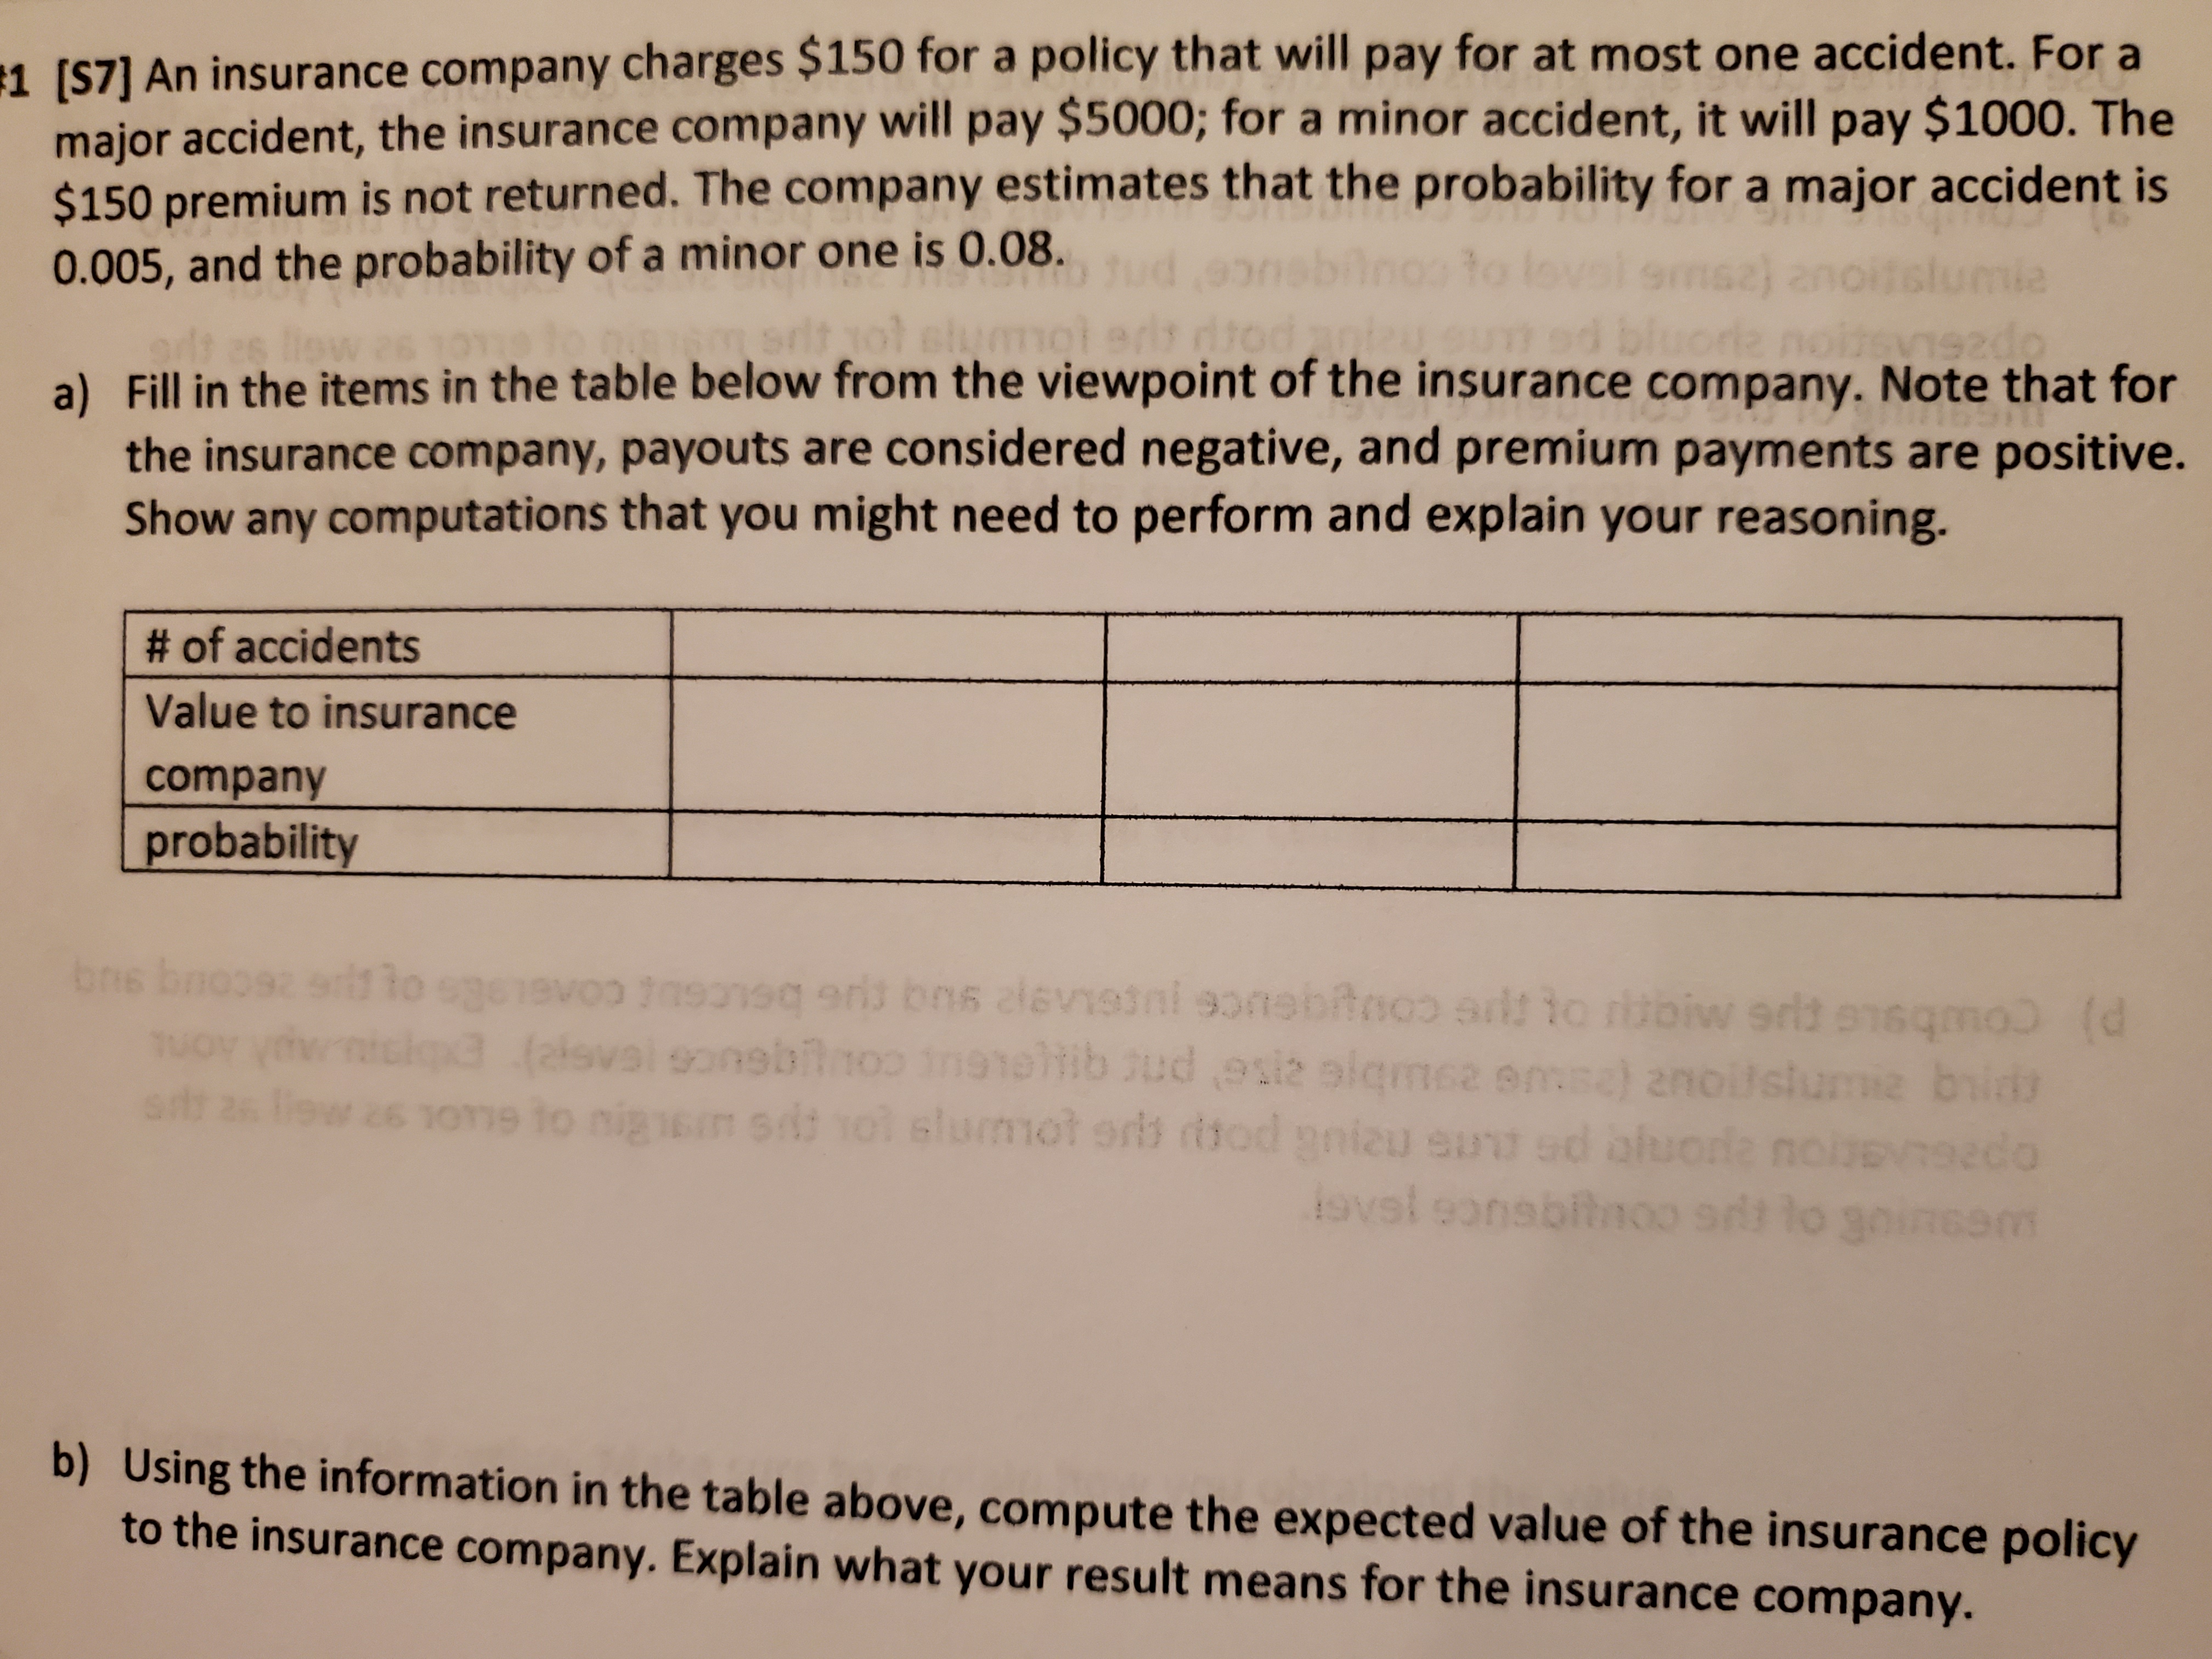 #1 [S7] An insurance company charges $150 for a policy that will pay for at most one accident. For a
major accident, the insurance company will pay $5000; for a minor accident, it will pay $1000. The
$150 premium is not returned. The company estimates that the probability for a major accident is
ia
0.005, and the probability ofa minor one is 0.08.
s2)
tol
a) Fill in the items in the table below from the viewpoint of the insurance company. Note that for
the insurance company, payouts are considered negative, and premium payments are positive.
Show any computations that you might need to perform and explain your reasoning.
# of accidents
Value to insurance
company
probability
bns bro
to sg61e*
bns davisn 90 ebtoo sidt
0 (d
(alsvsi sonsbino
too nigns sit ol slurmot srs diiod yniau eund sd aluoda noi
1N
ud est alqm62 9m) 2n
90
sdy
iew s
26 10T
surd
92do
ivel eonsbitn0o 9dtlo g0
6901
b) Using the information in the table above, compute the expected value of the insurance policy
to the insurance company. Explain what your result means for the insurance company.
